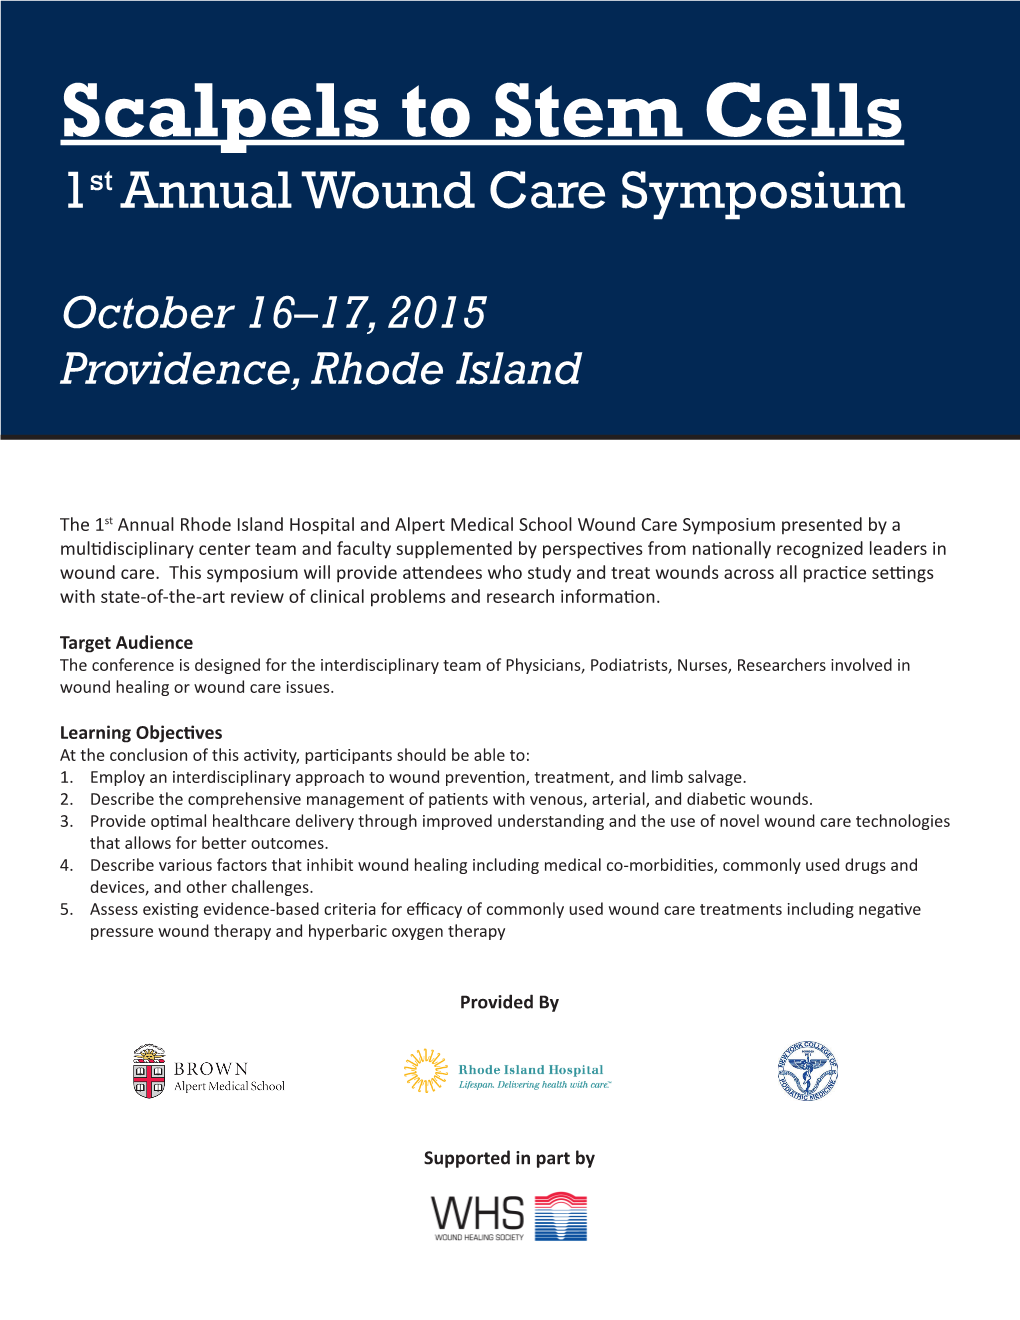 Scalpels to Stem Cells 1St Annual Wound Care Symposium